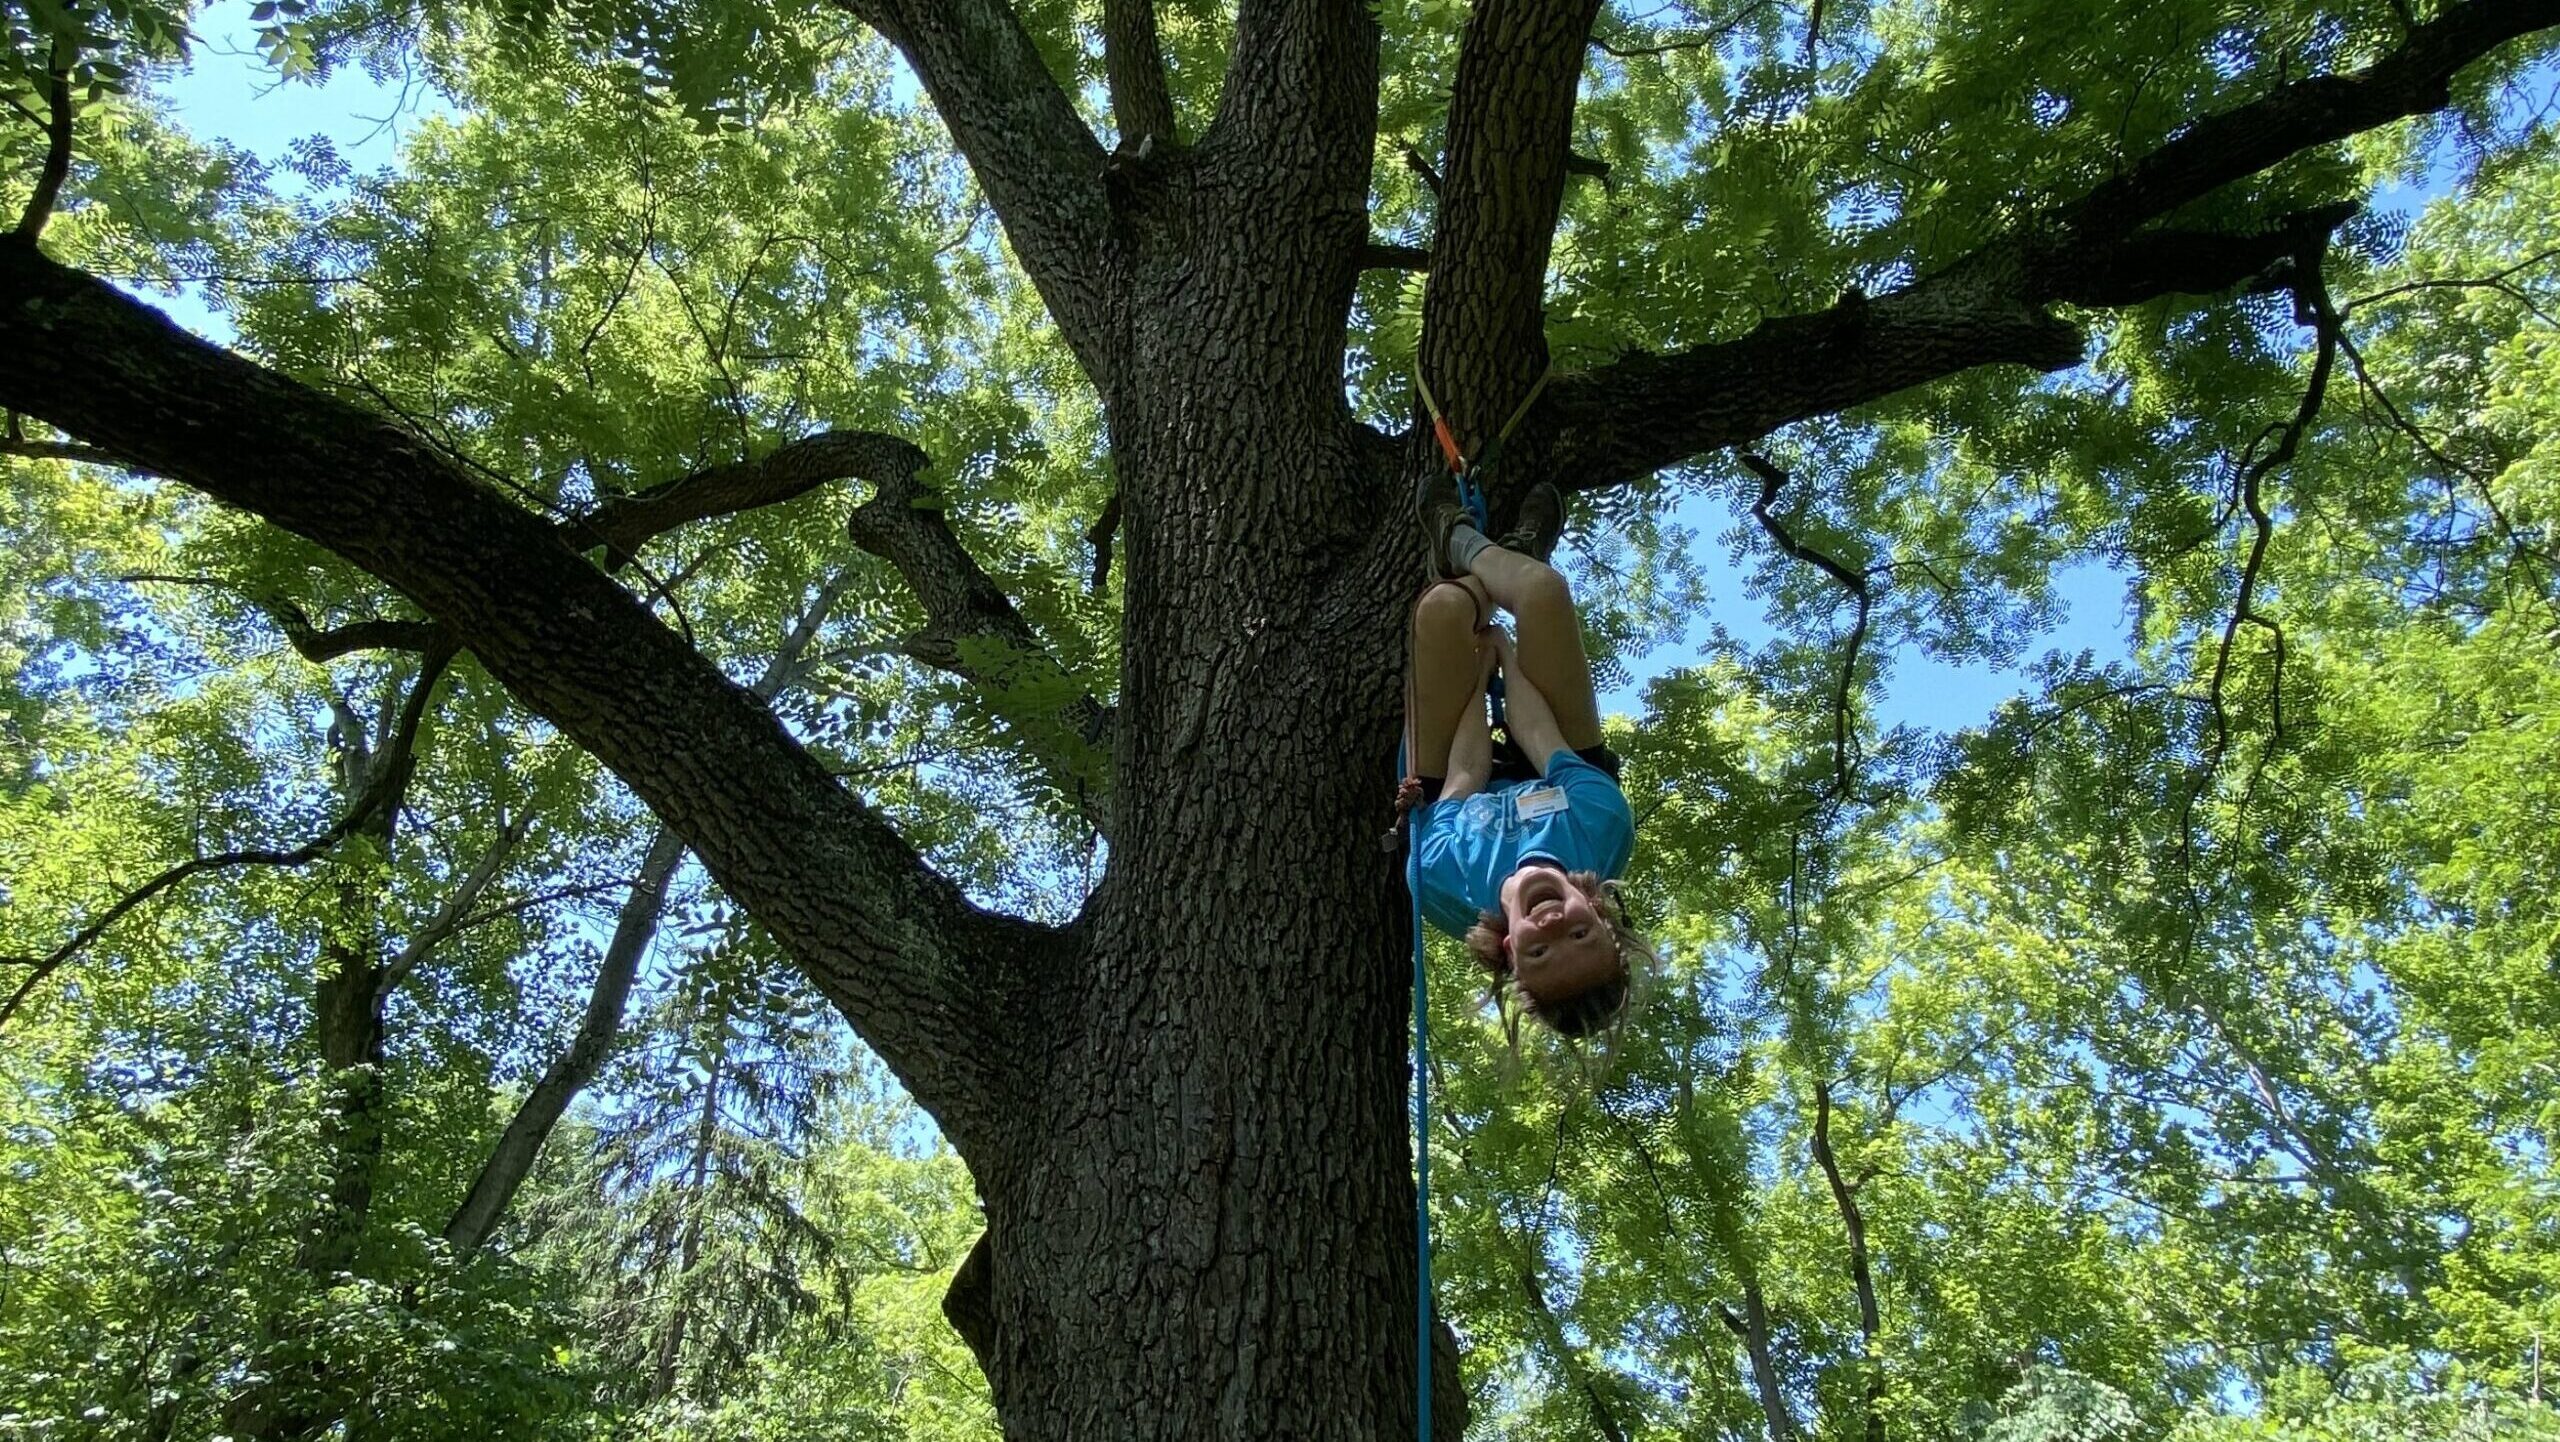 Indy Parks staff Donna Riner climbing large tree